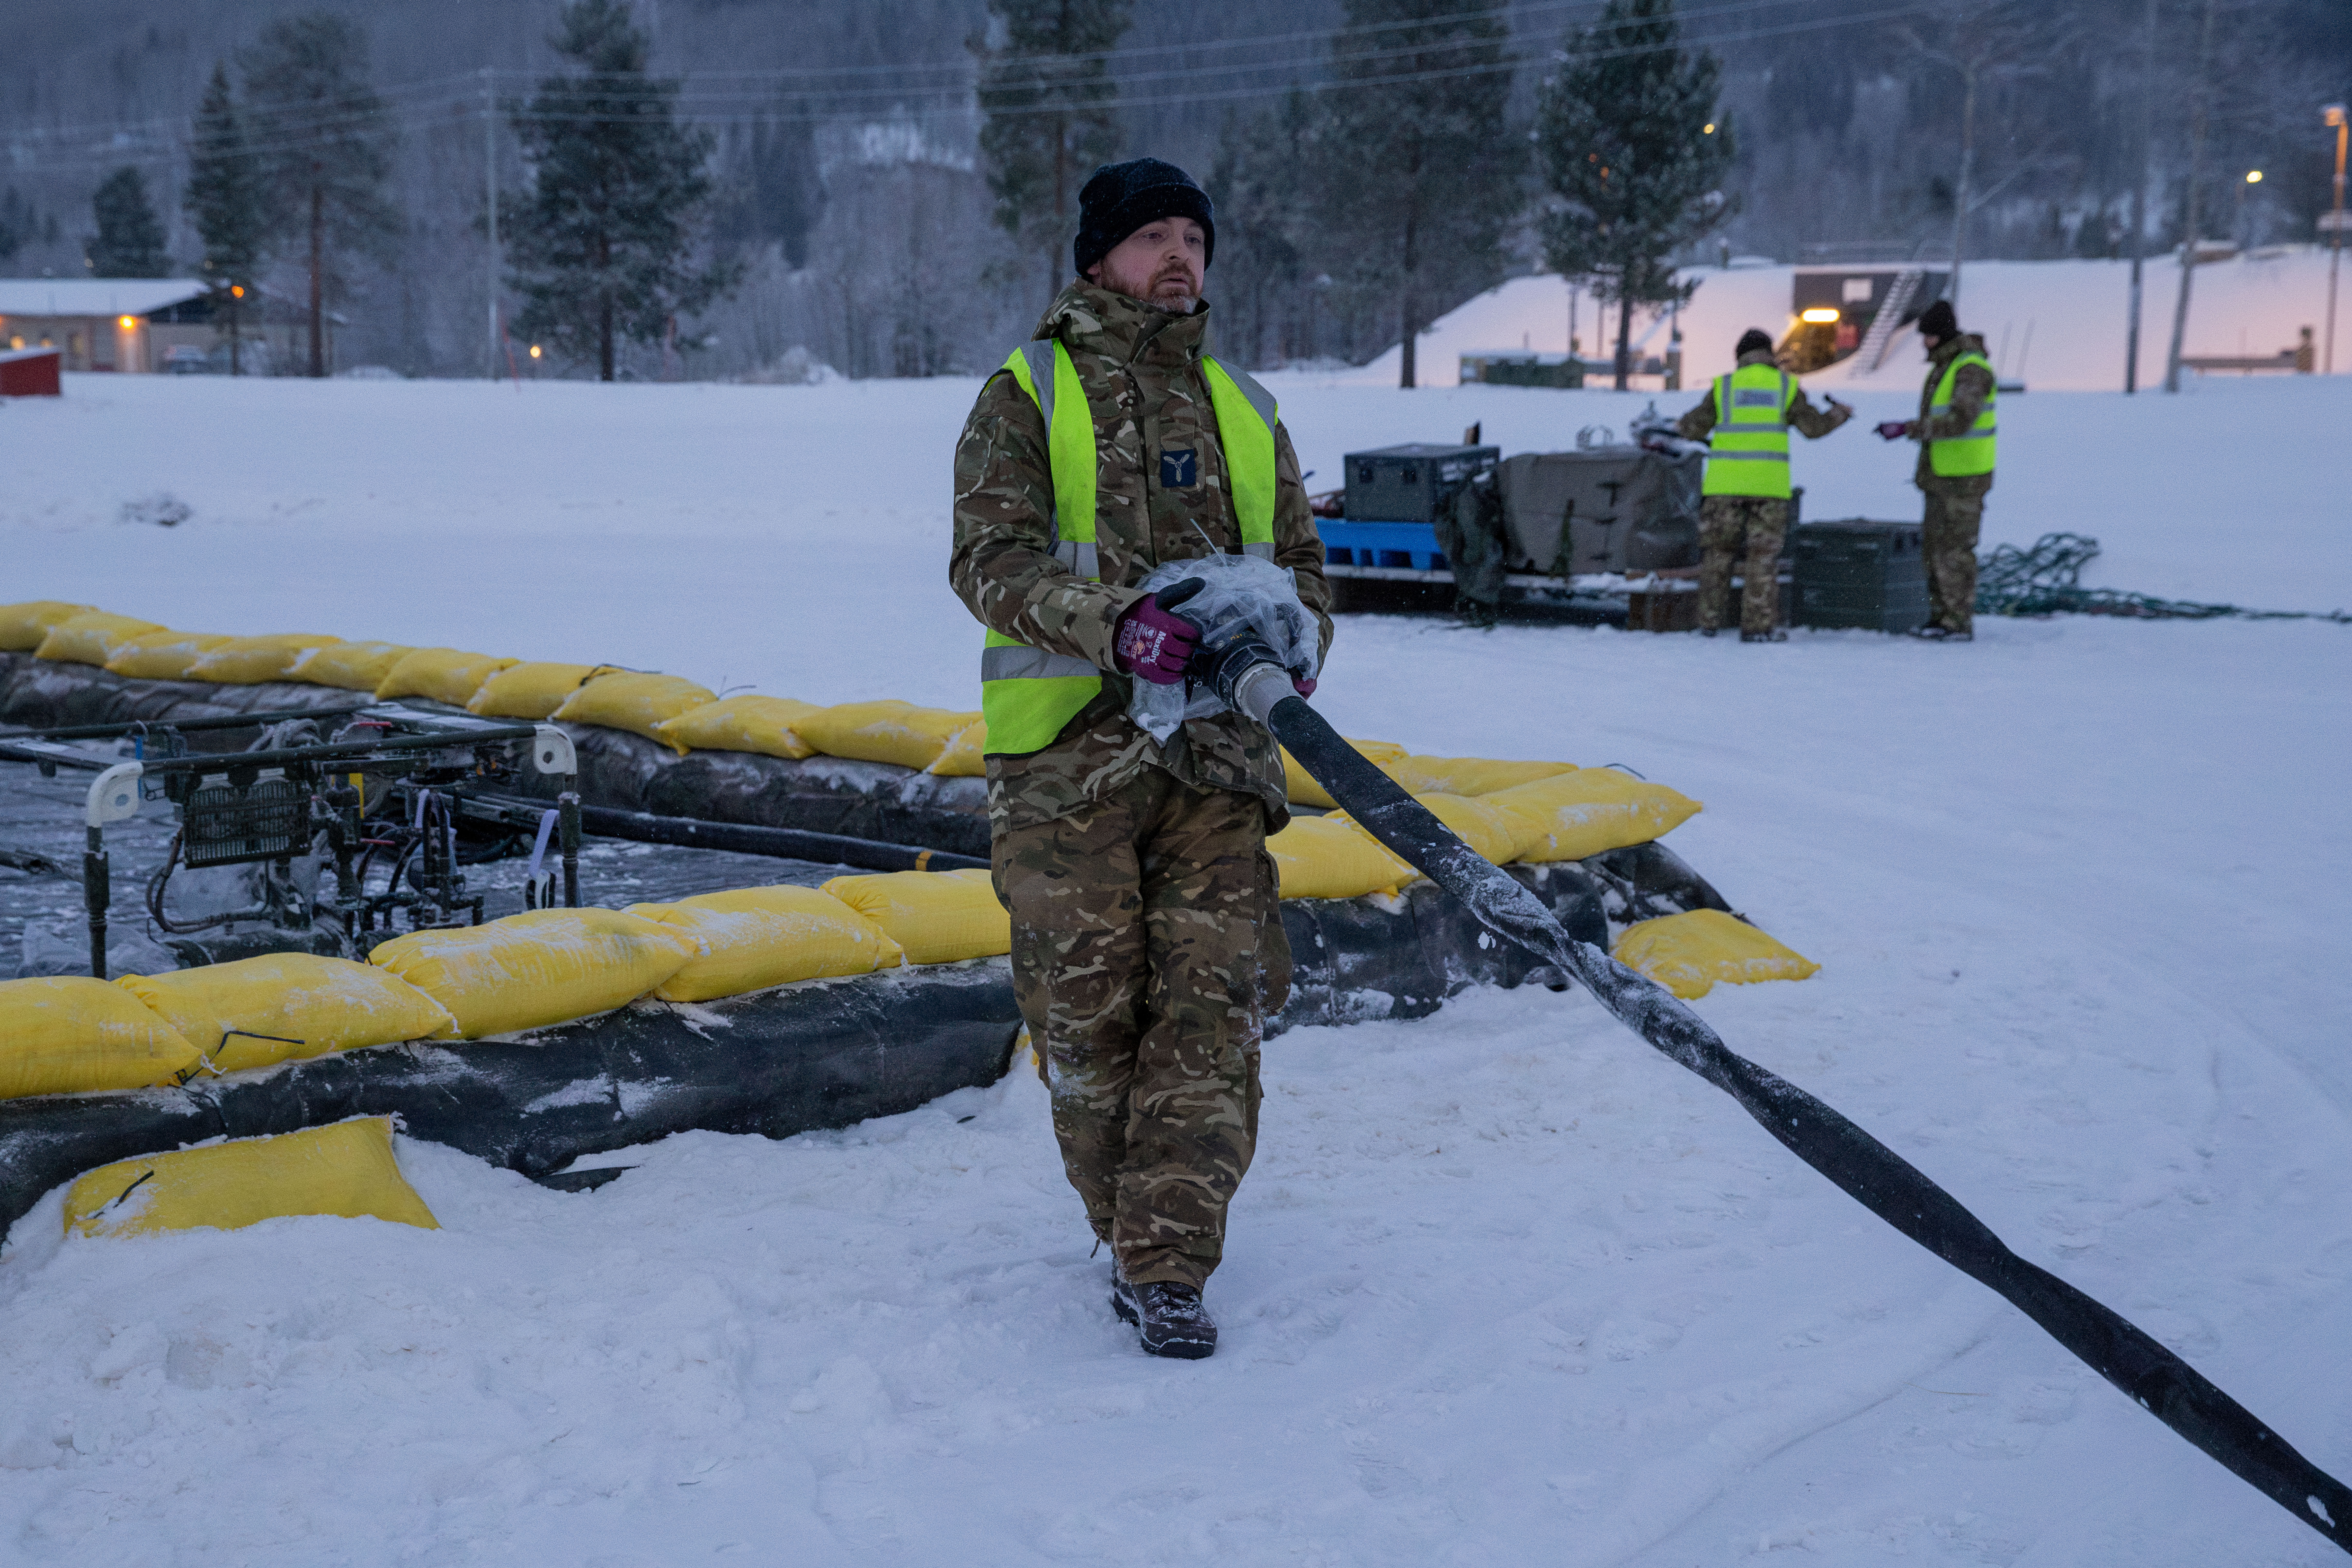 Serviceperson testing equipment in the snow.